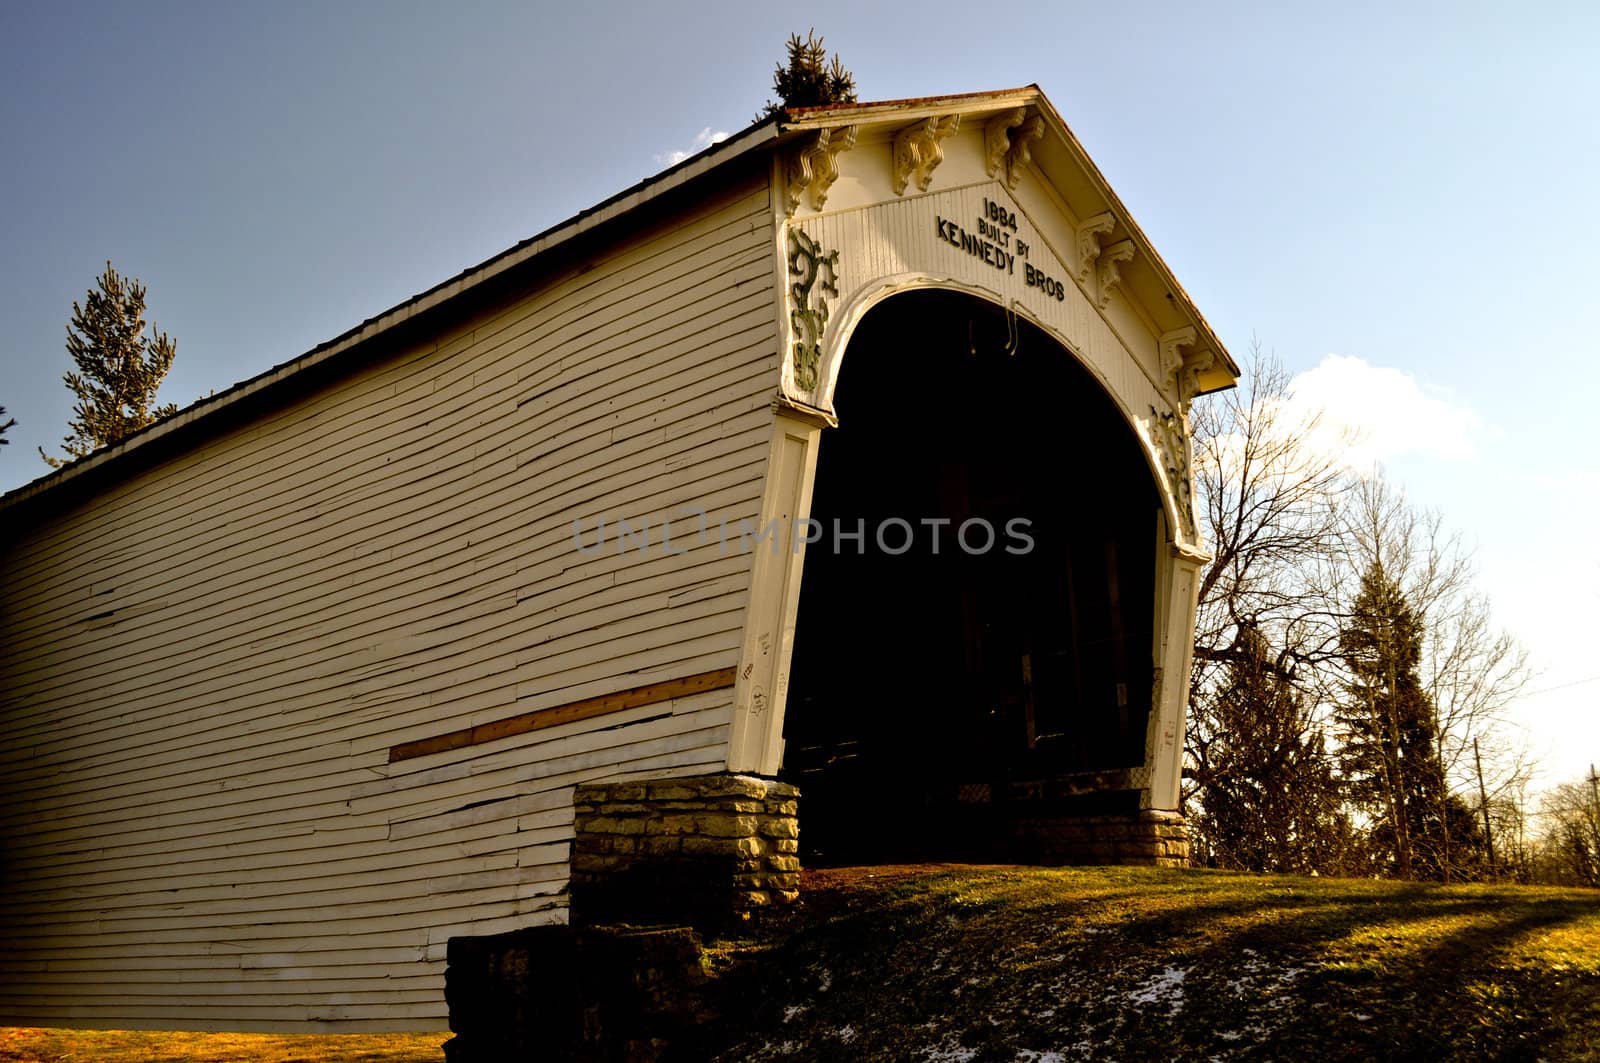 Kennedy Bros Covered Bridge Connersville Indiana